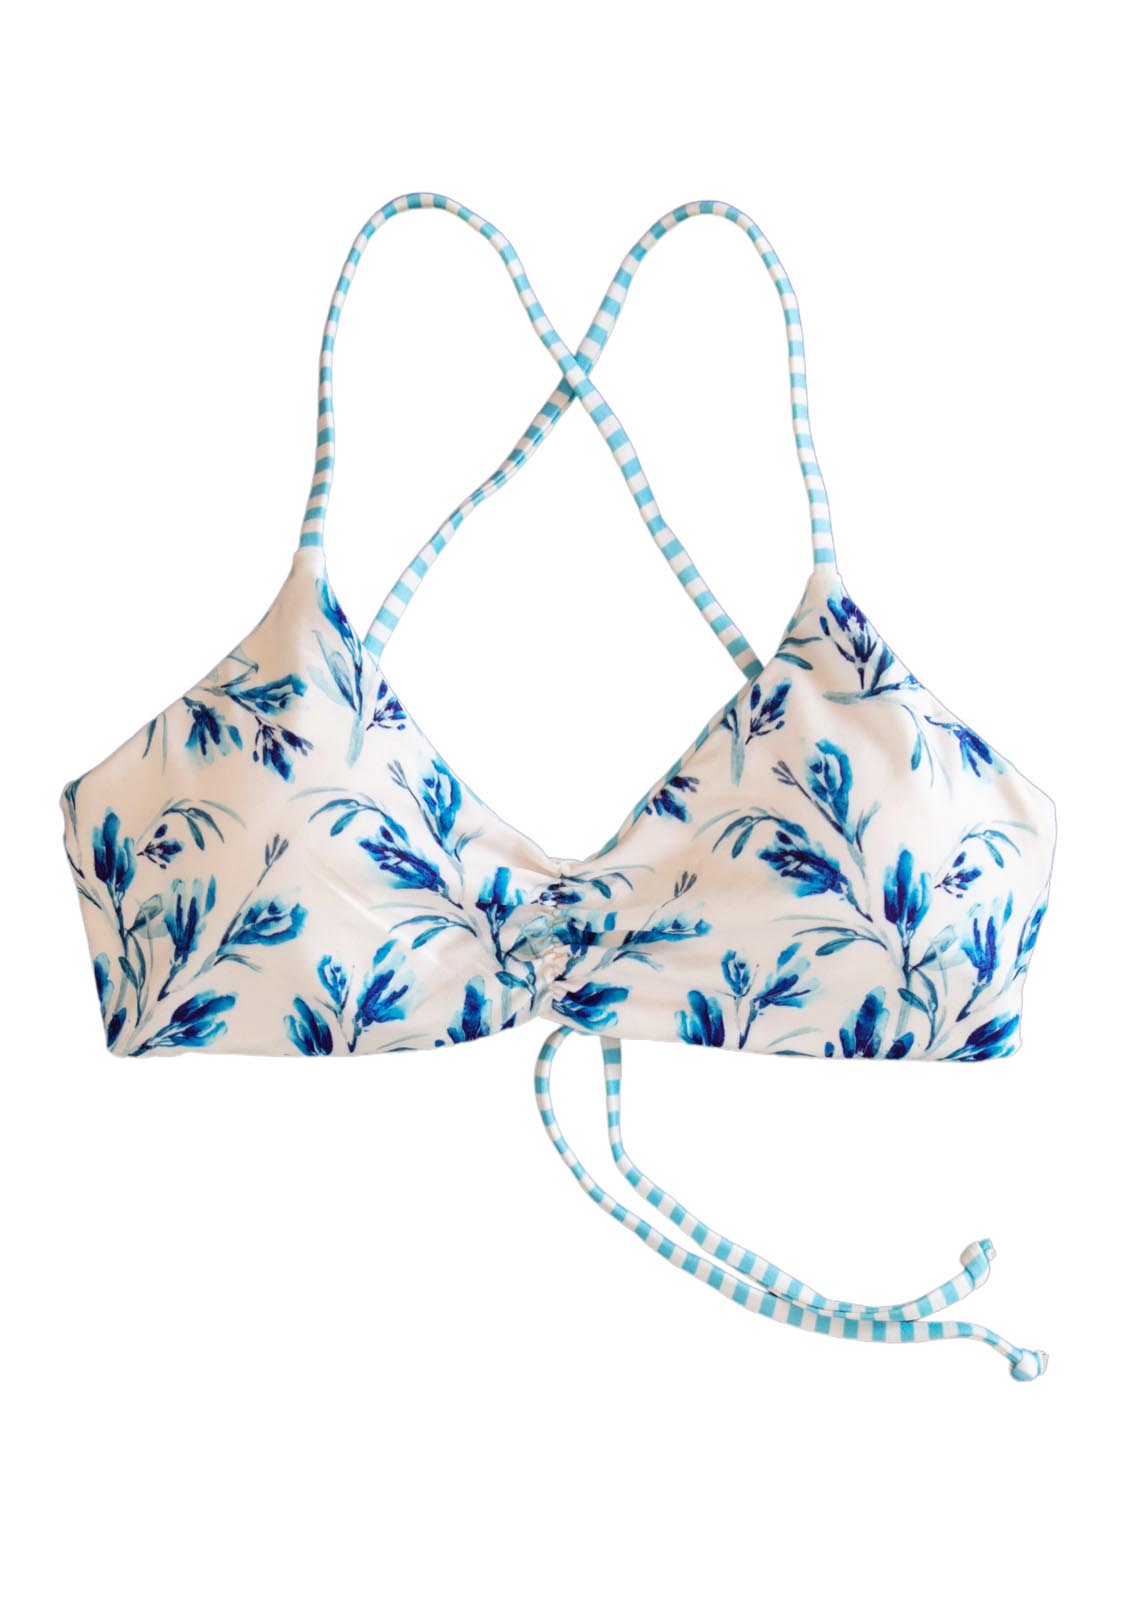 Reversible Blue white floral swim top for Teen girls and women with stripes by Chance Loves designs